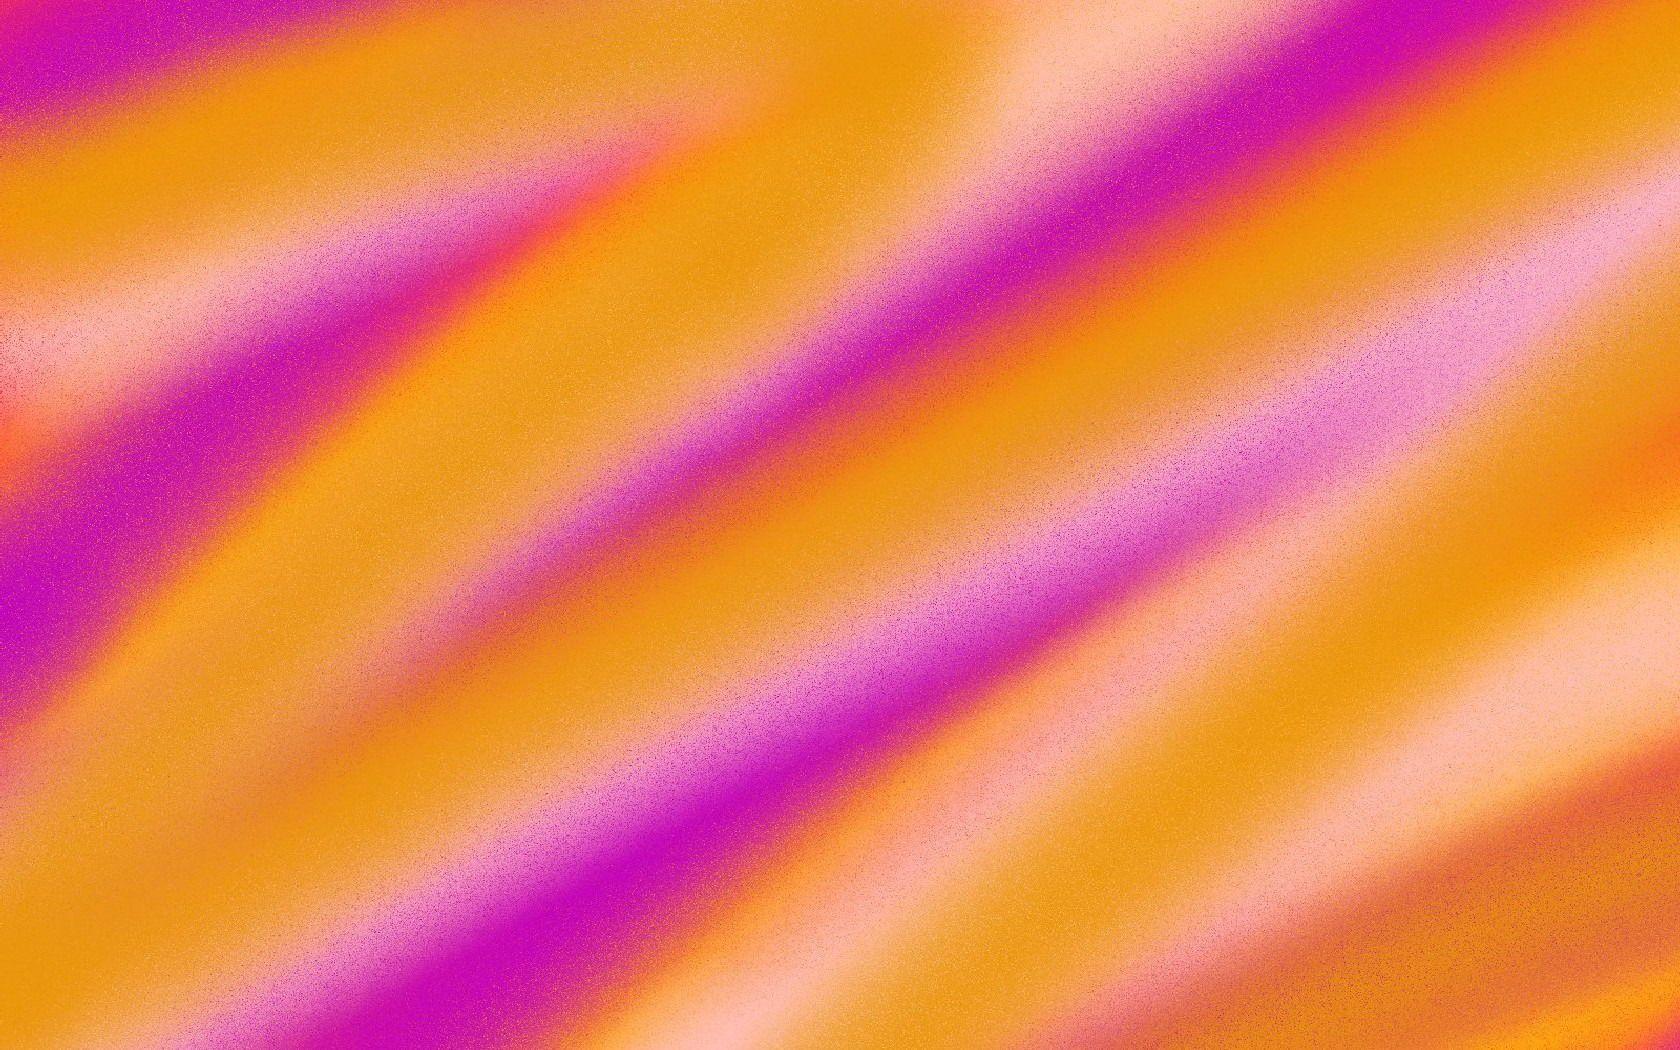 texture purple and yellow by dancinghamham on deviantart on purple and yellow wallpapers